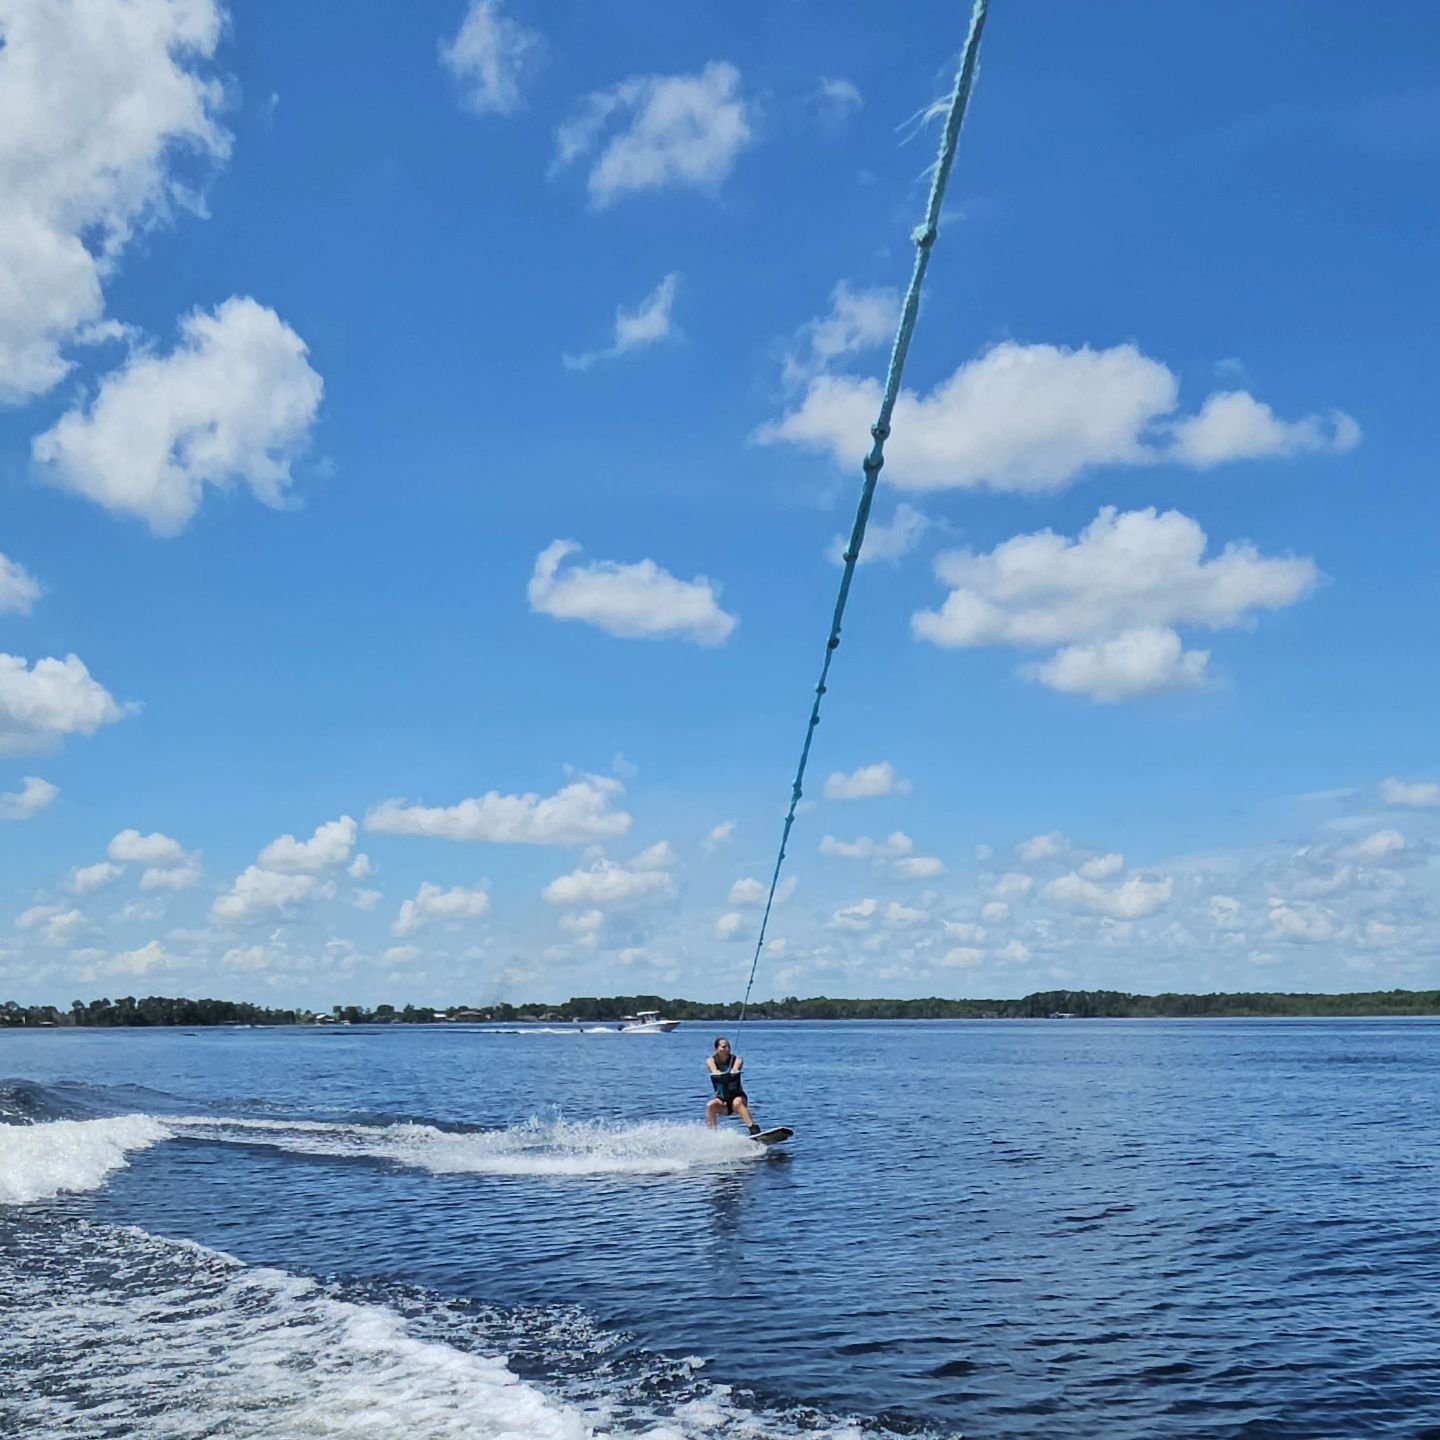 We had an awesome wakeboarding day with coach Rick at Florida Ski School.  Malcom, Bianca, and Roberta did amazingly well.